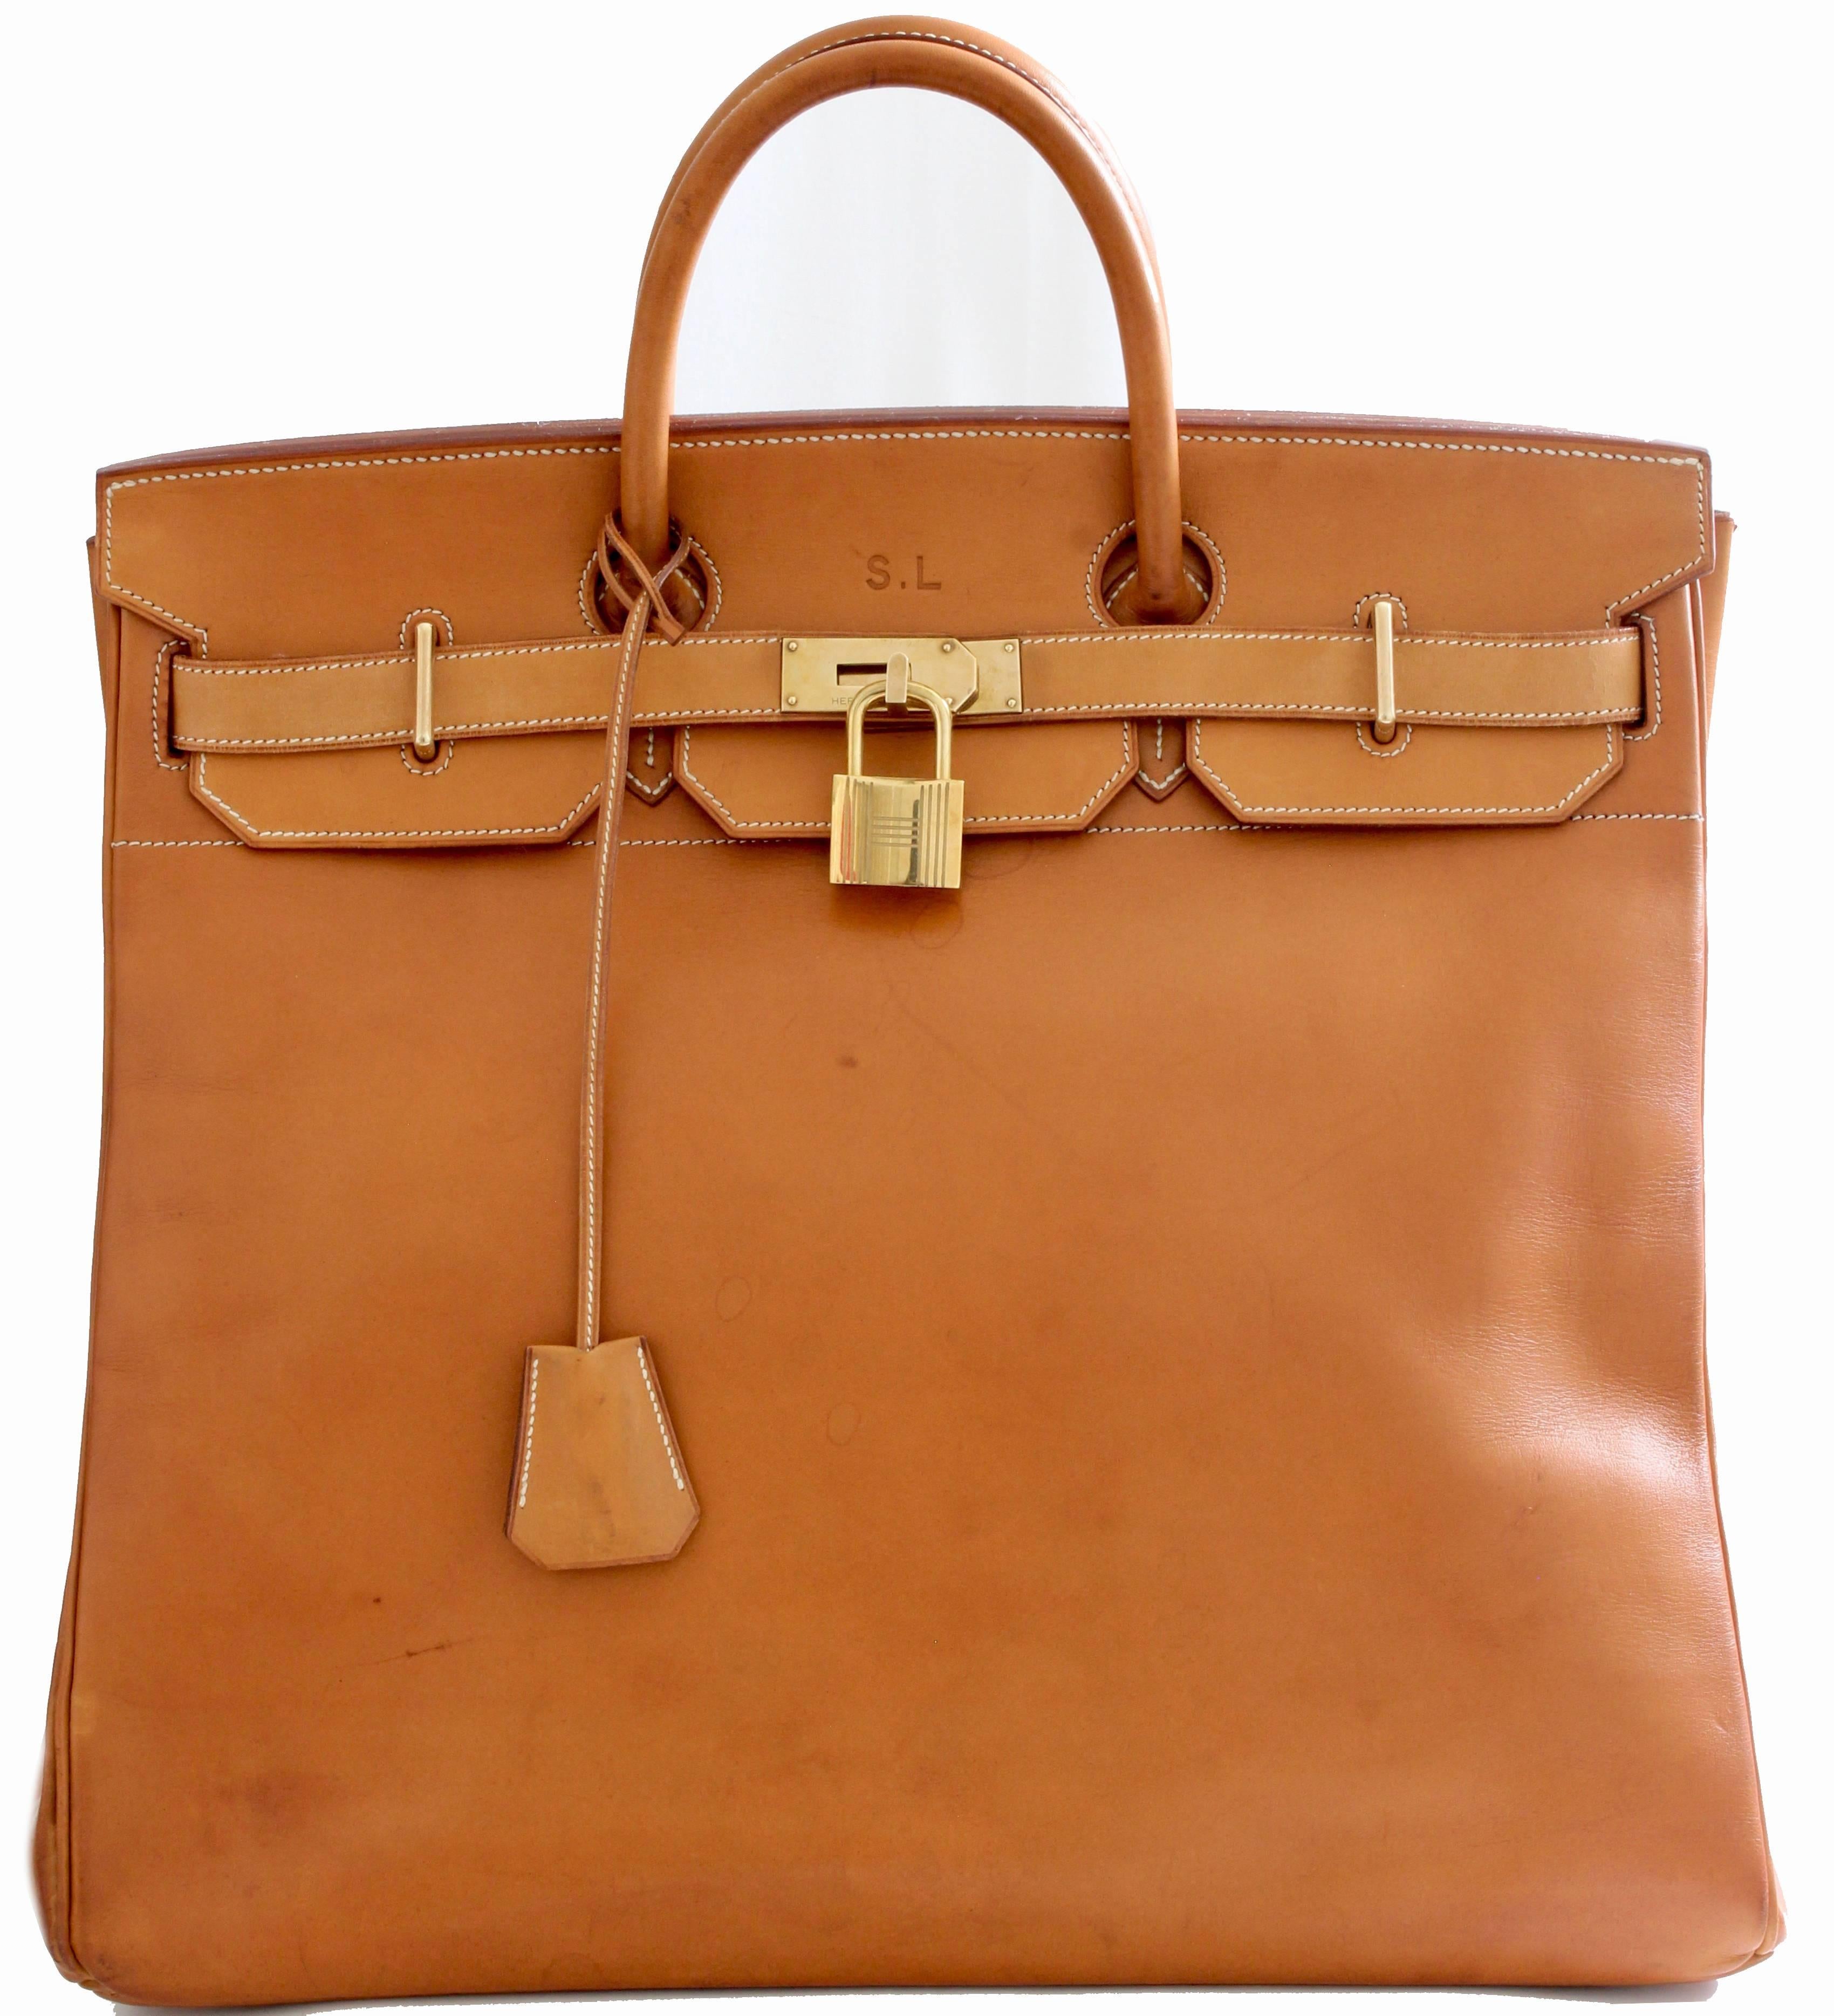 This iconic and extremely rare 45cm travel tote was made by Hermes Paris in 1985.  Made from Vache Natural leather,  Hermes saddle leathers are some of the most sought after due to their durability and the rich patina which develops with age. The